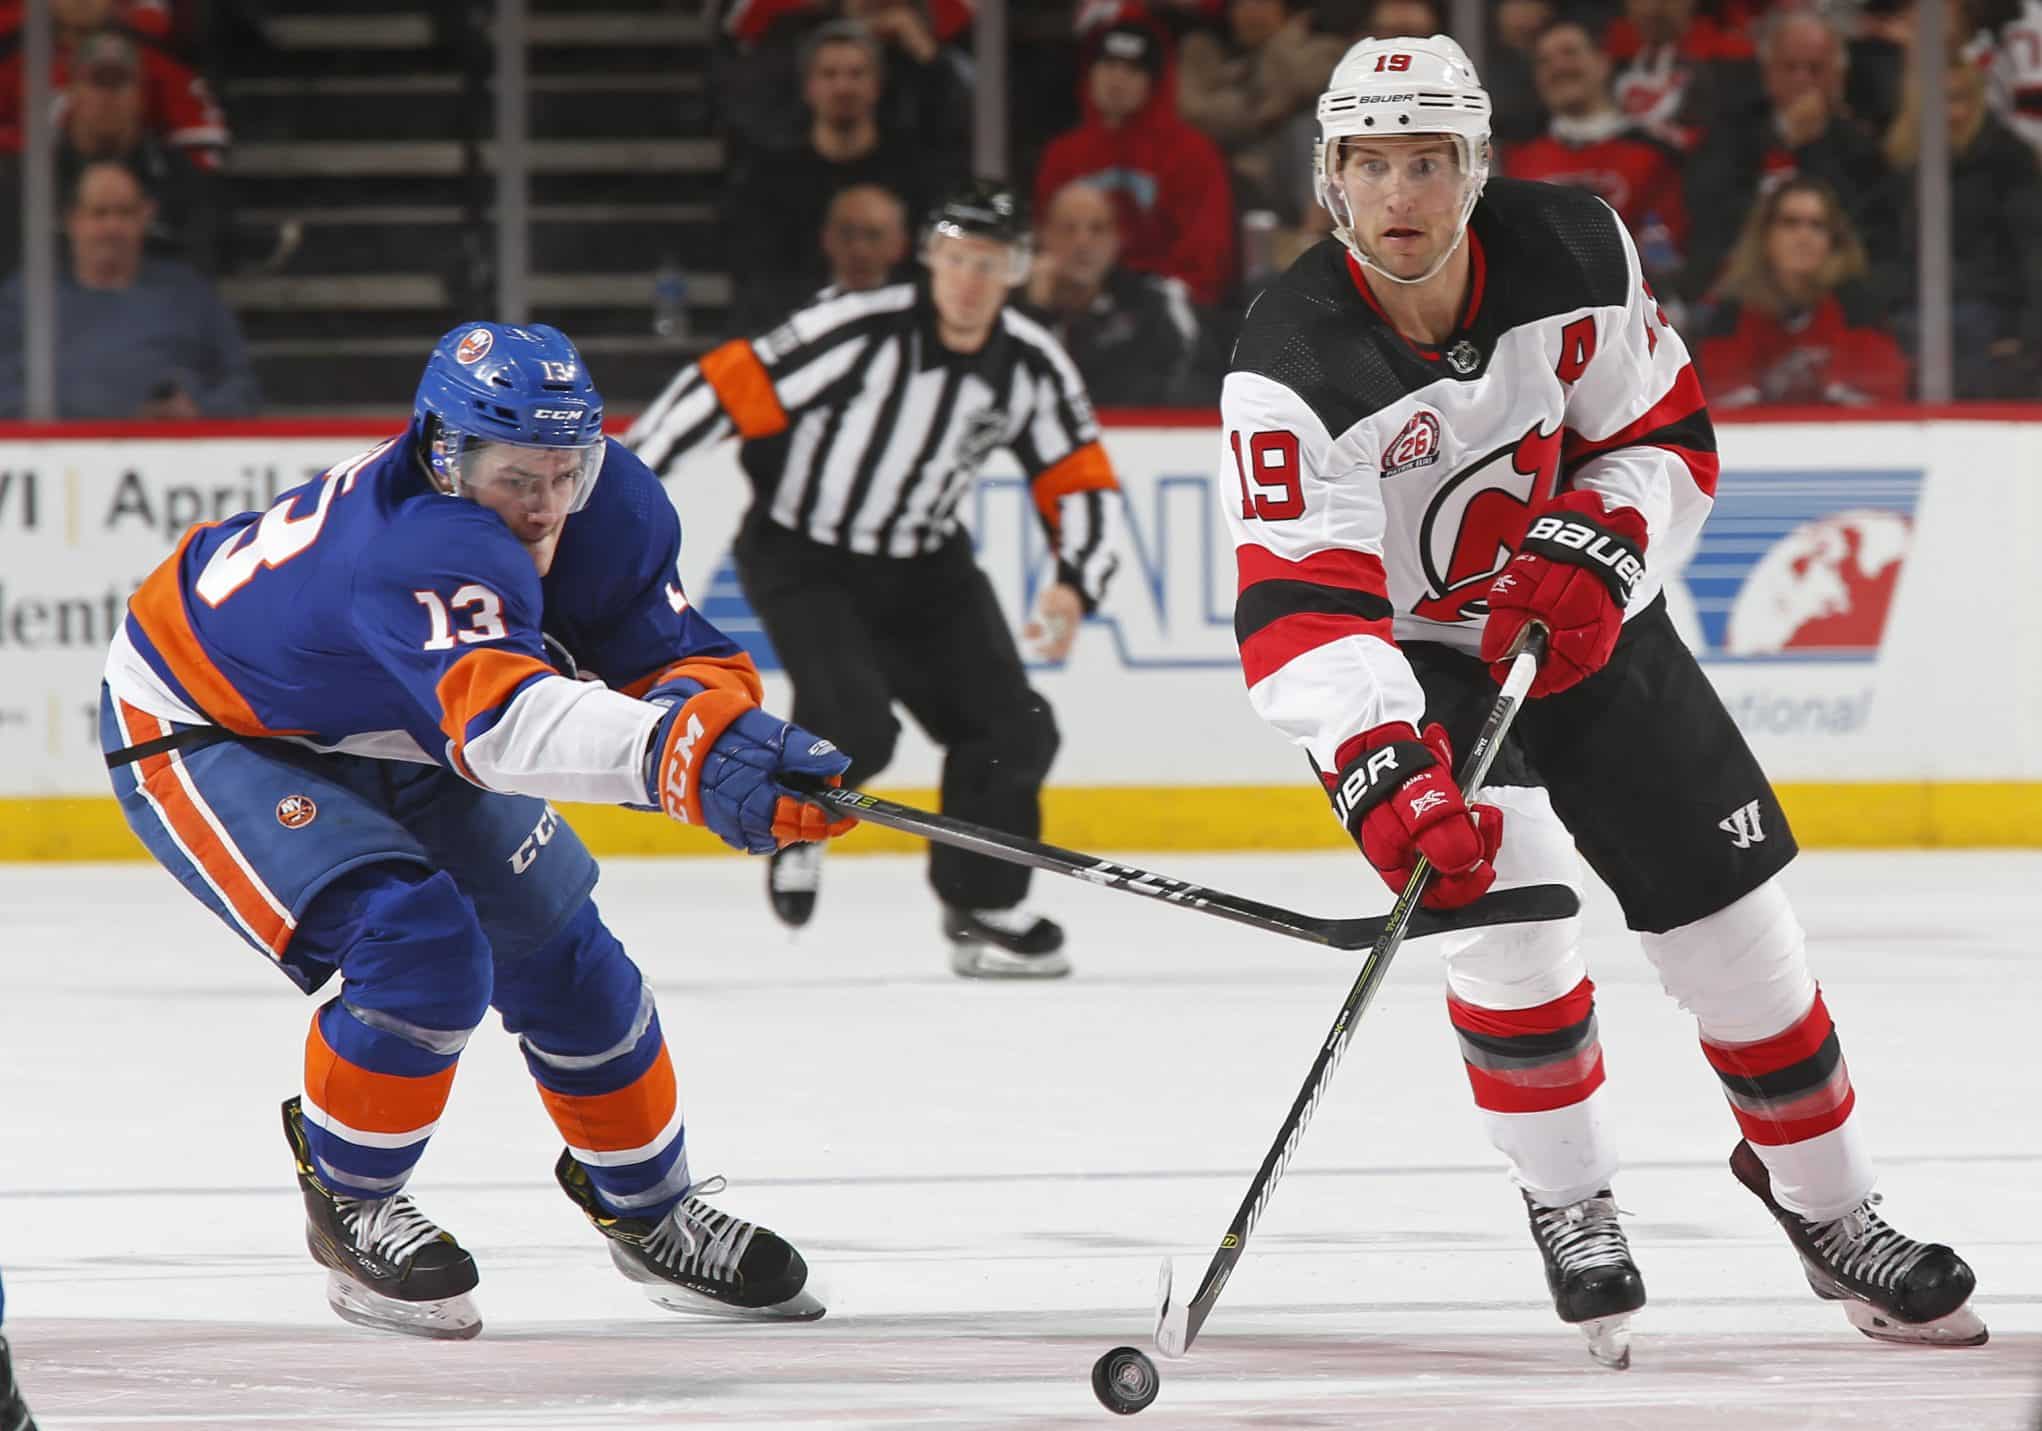 NJD 2, NYI 1: Devils stay hot, Islanders continue to cool